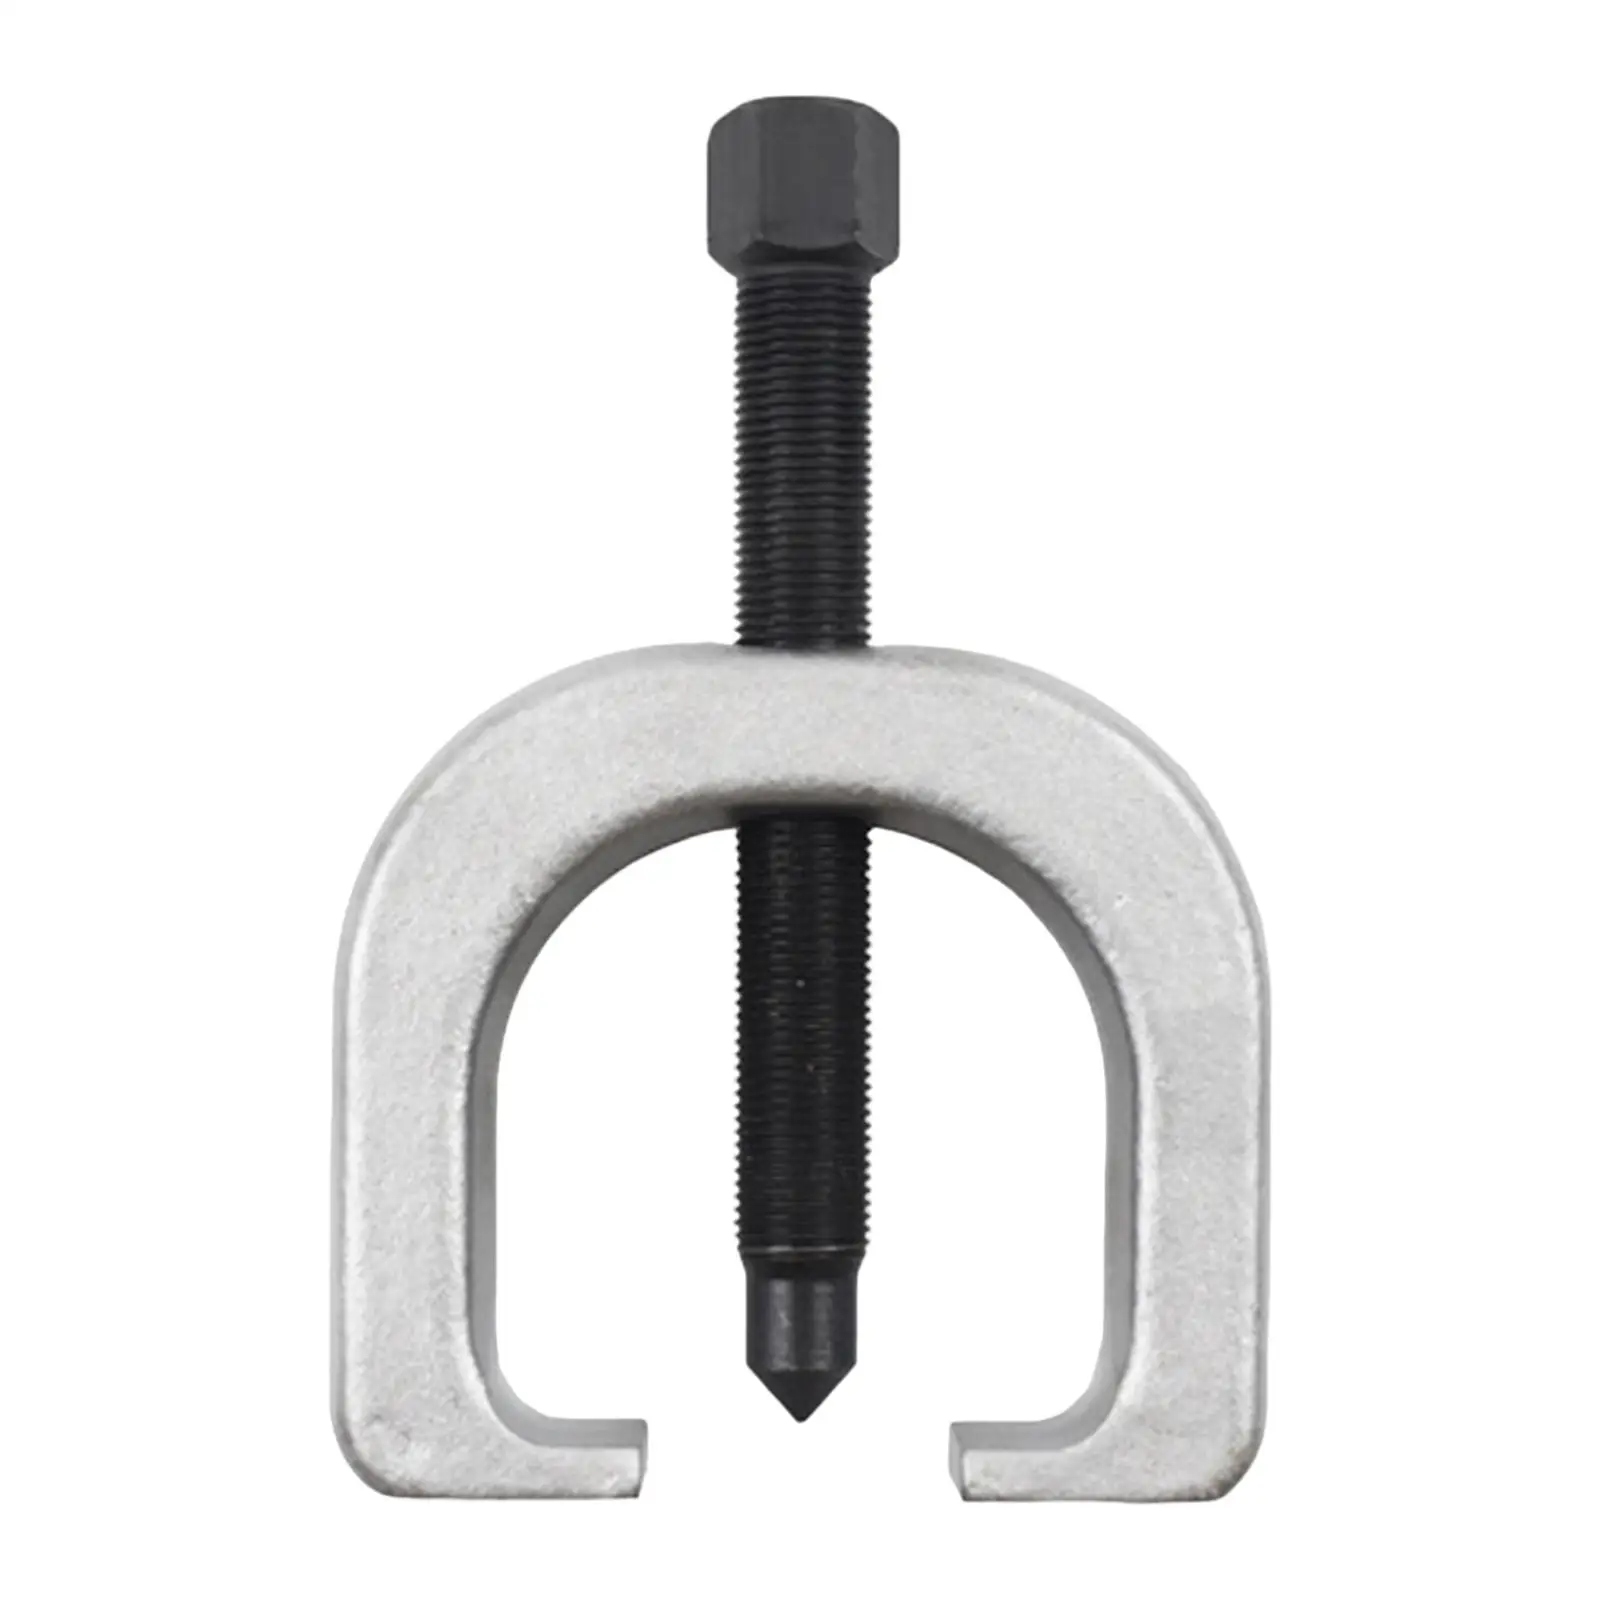 Slack Adjuster Puller Compact Easy to Operate Repair Tool for Trailers